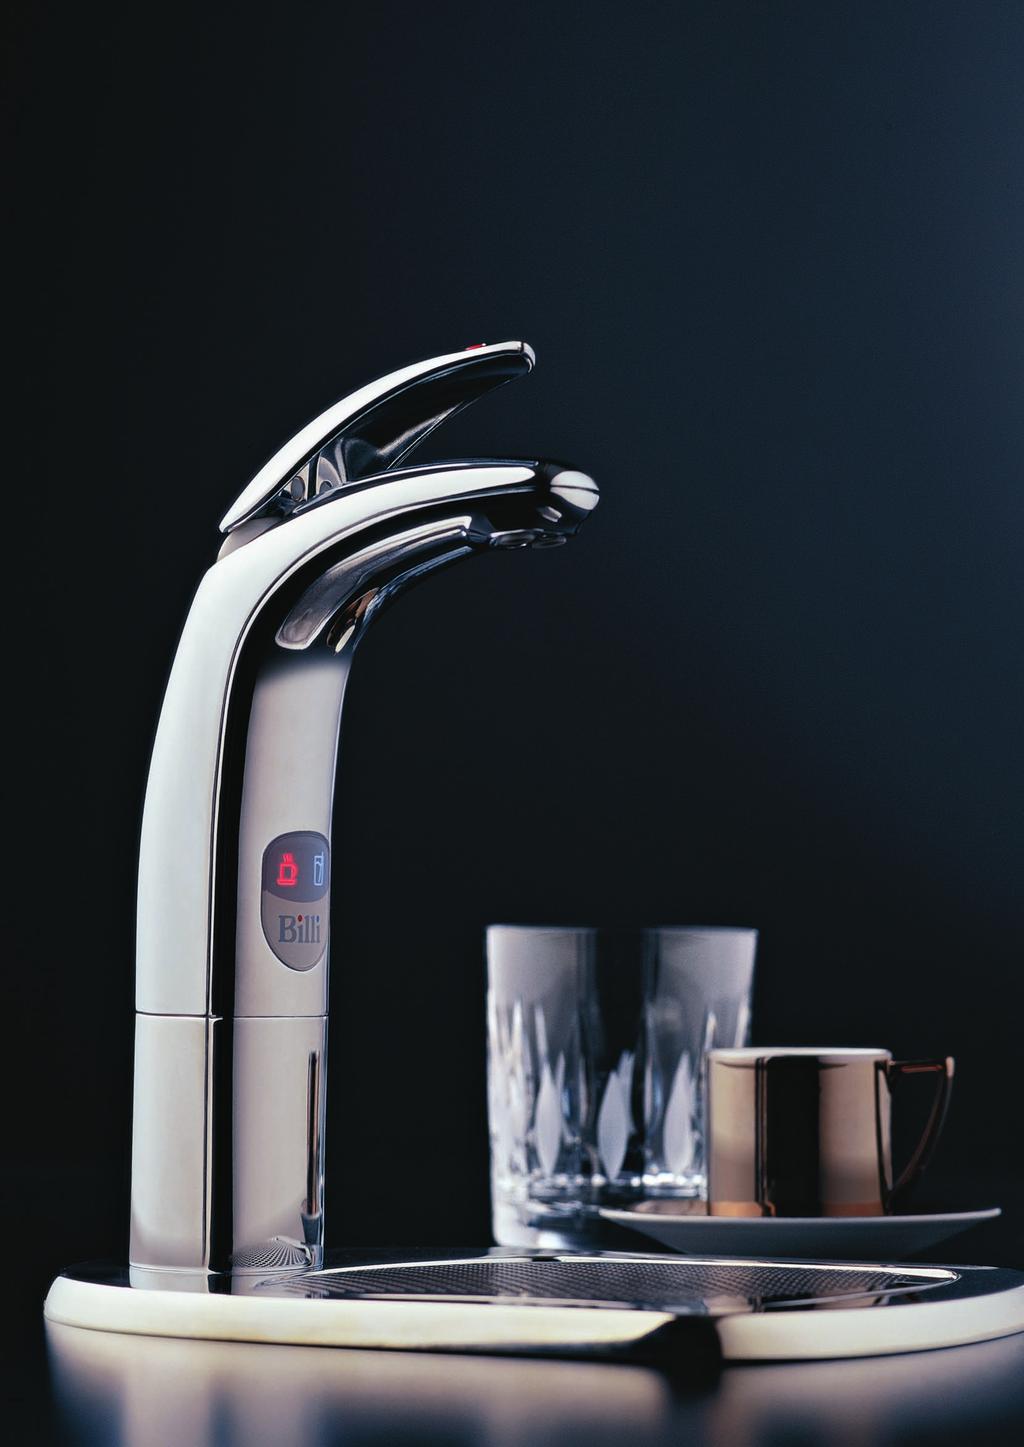 New Billi Quadra... is the ultimate drinking water appliance providing the convenience of an instant supply of refreshing and invigorating filtered water, both boiling and chilled.